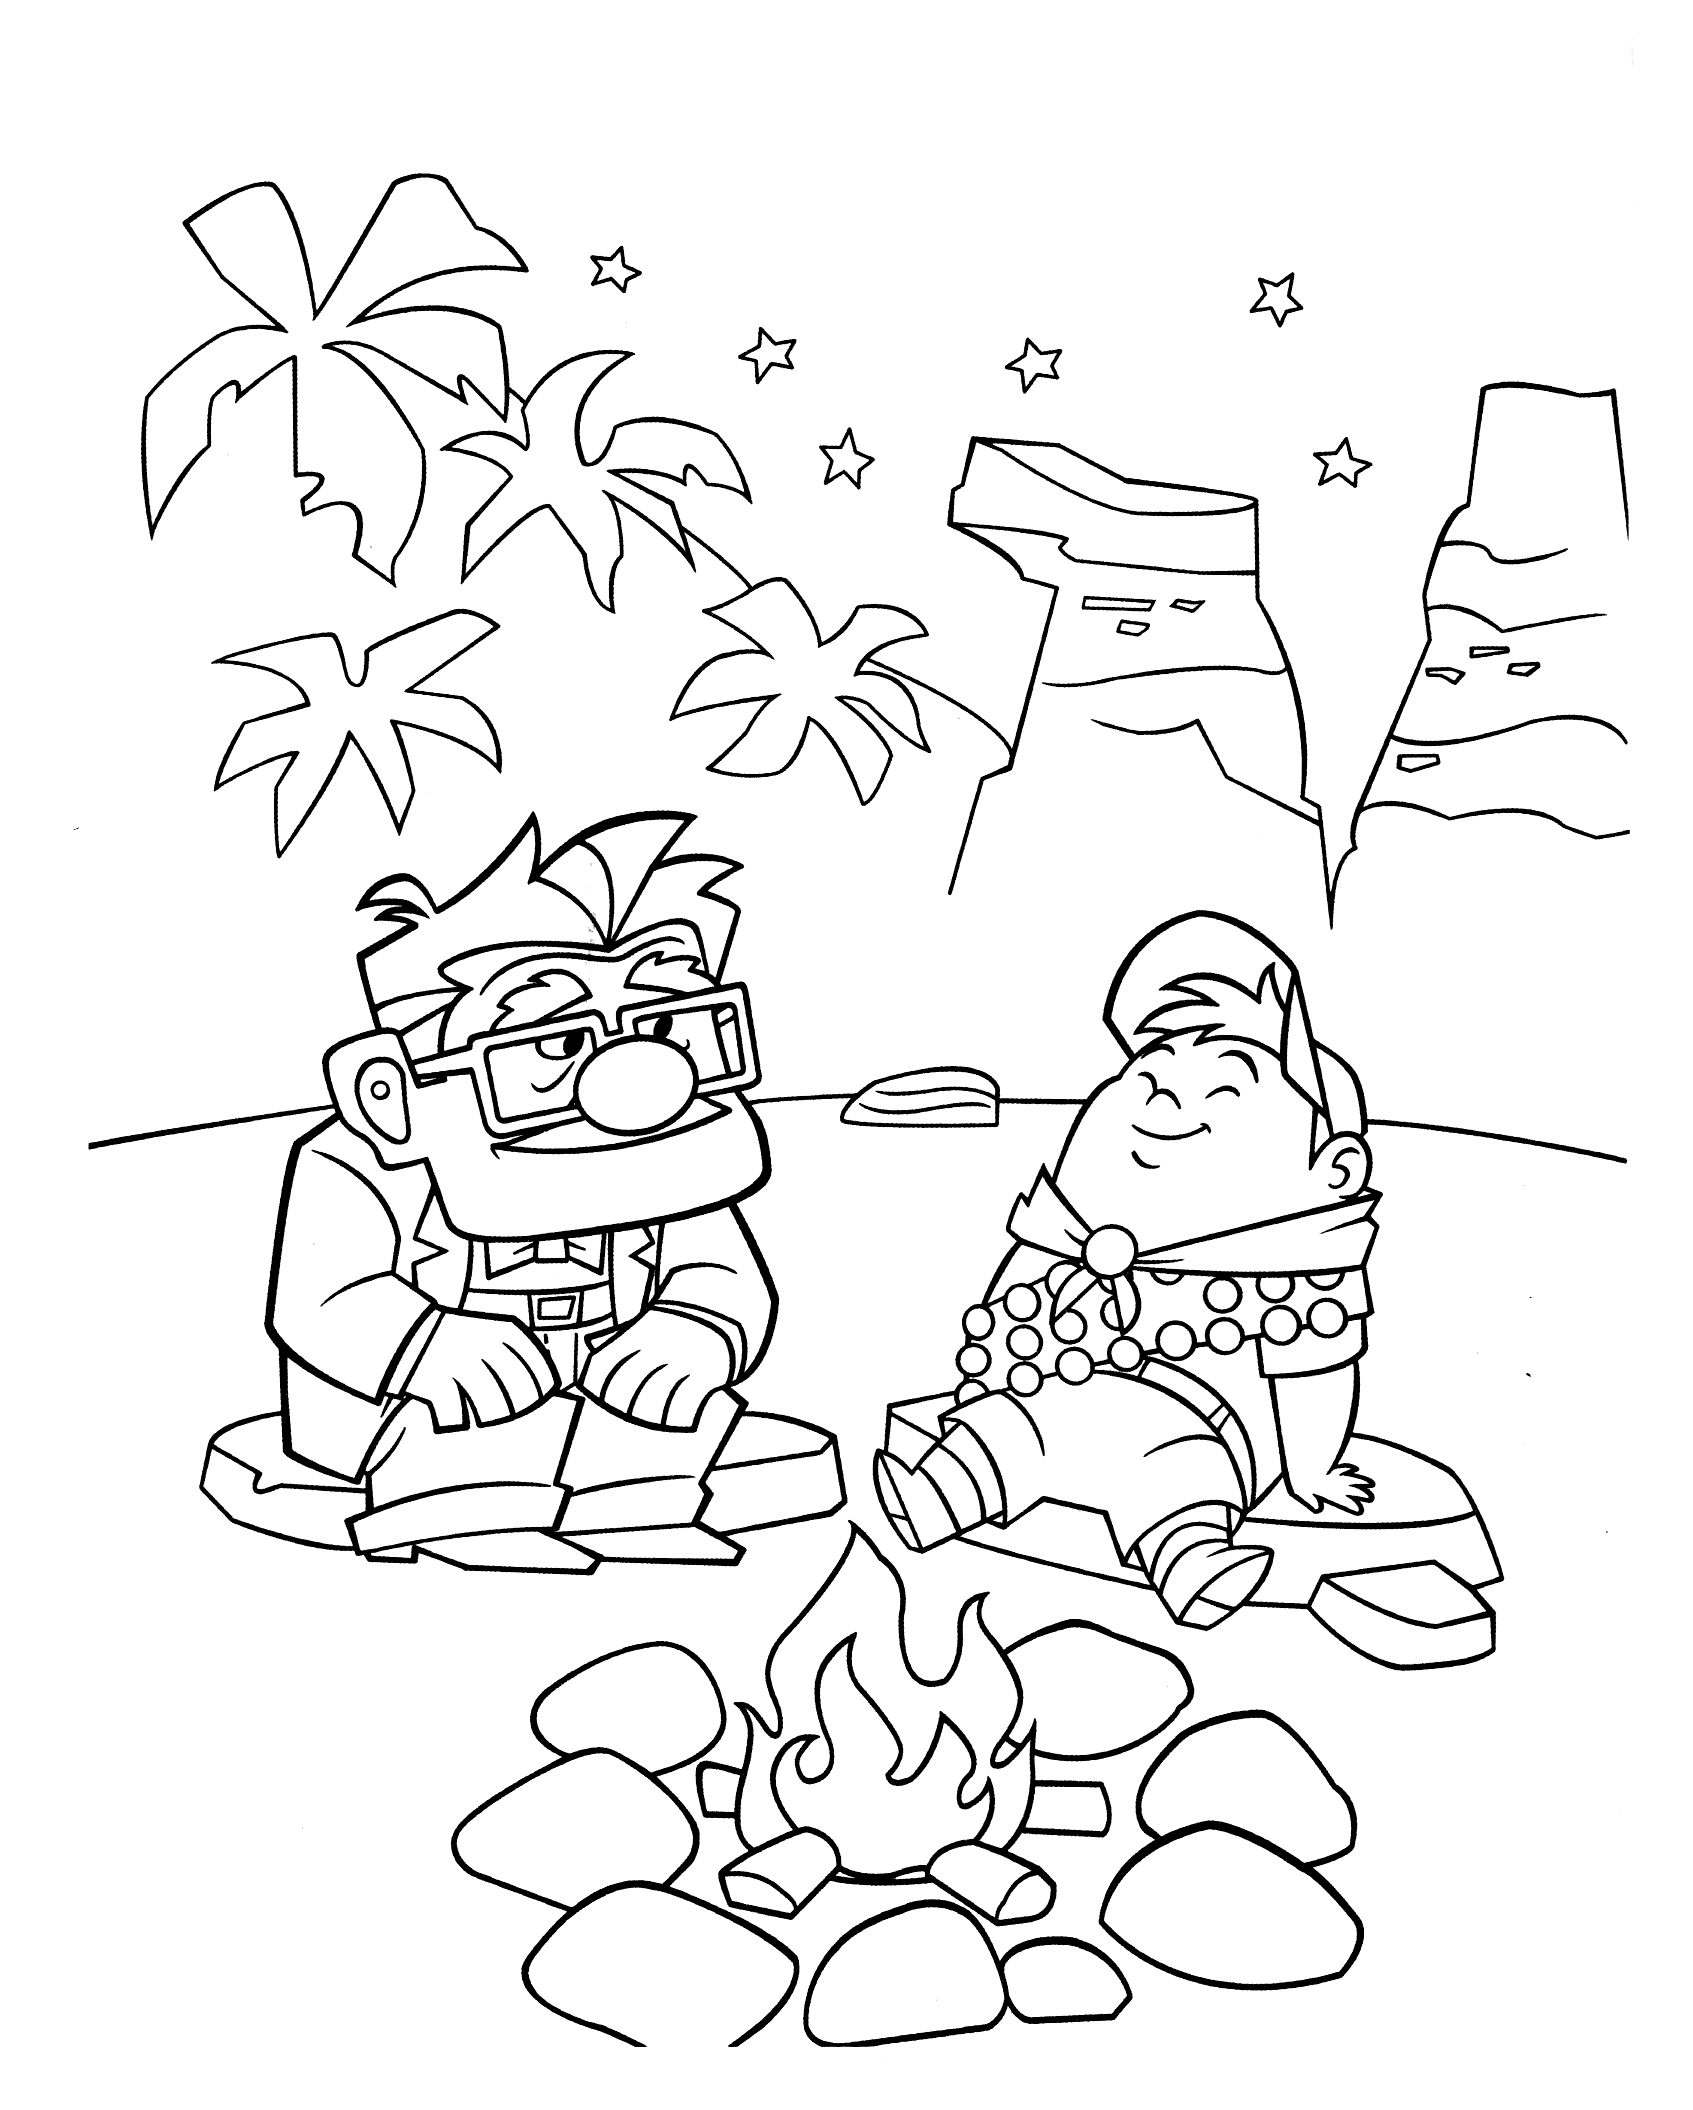 Download Coloring page - Bonfire in the night